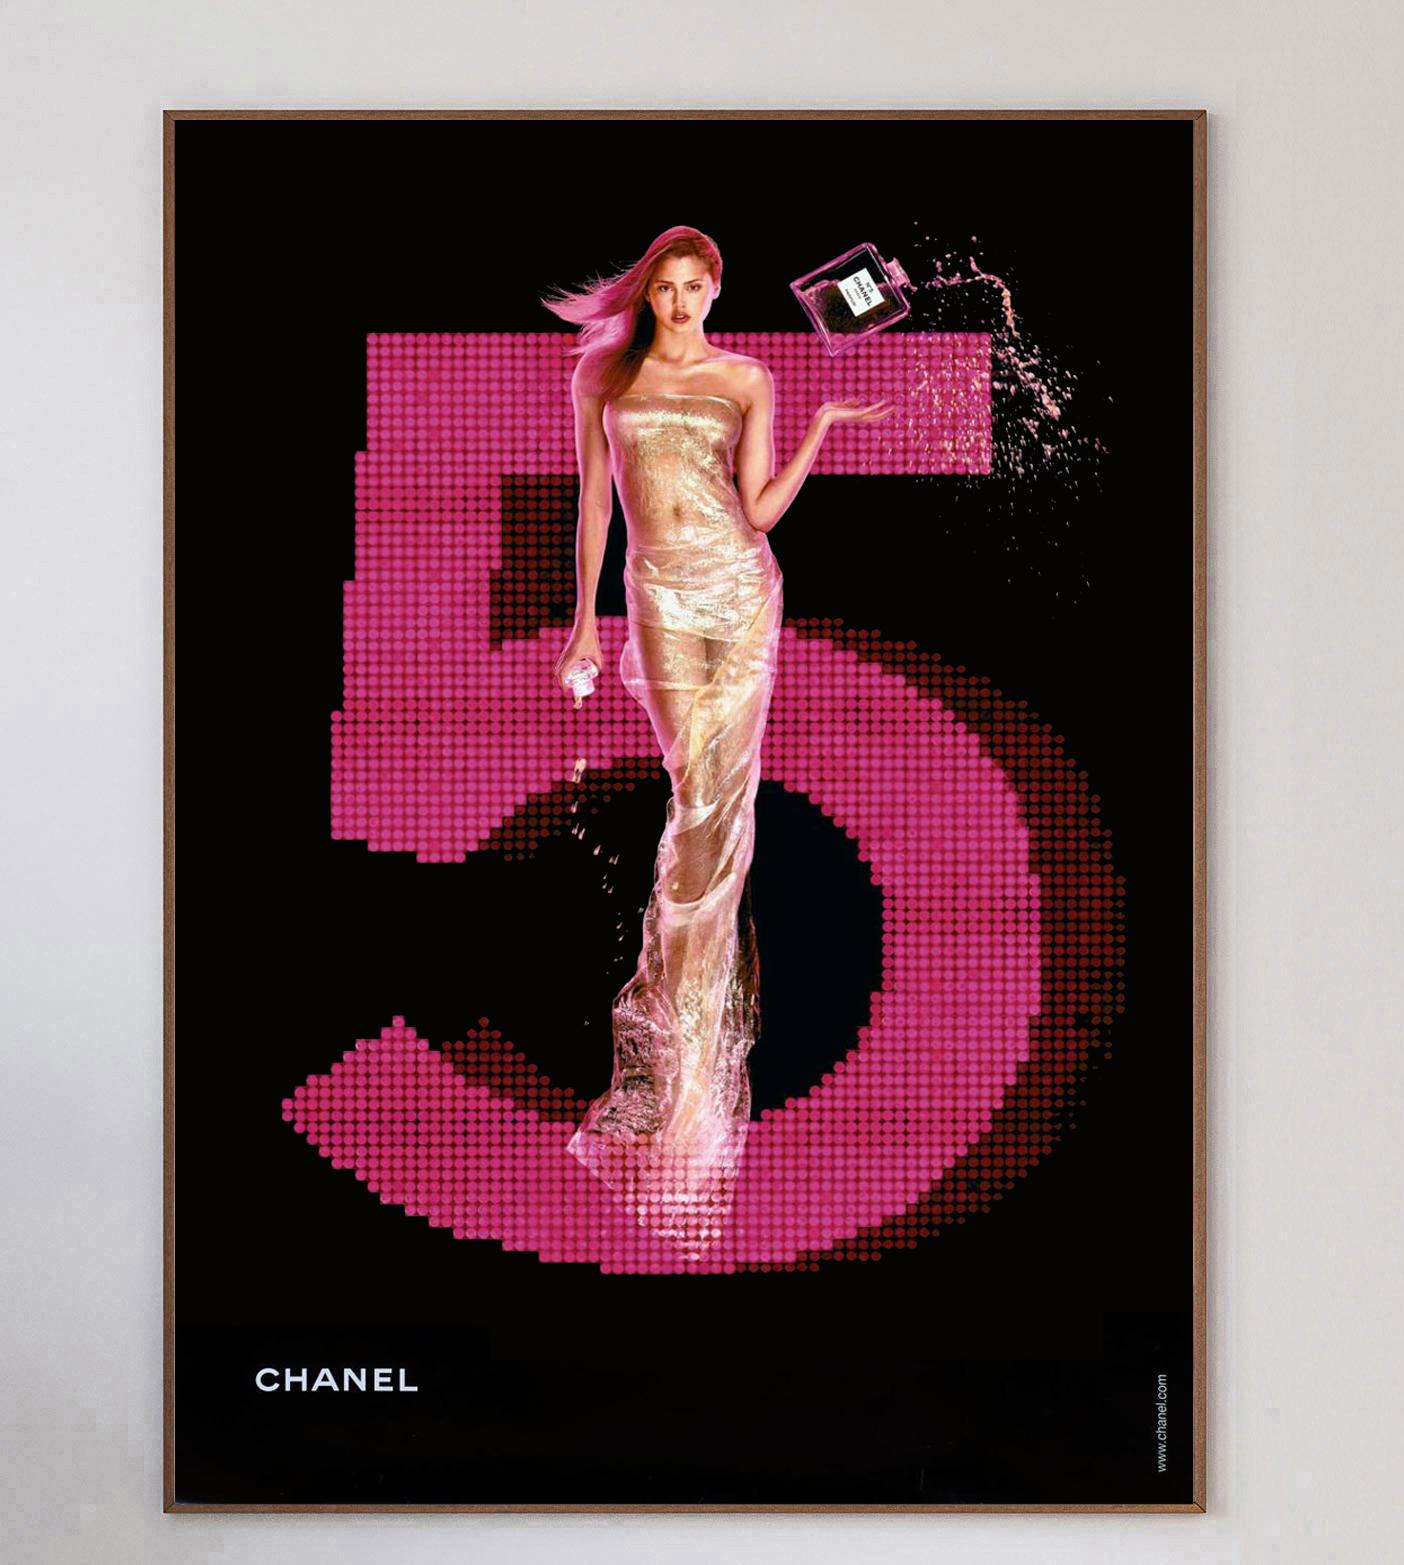 Extra-large poster promoting the iconic Chanel No.5 fragrance. The fragrance was first released in 1921 and continues to be one of the most popular in the world today. This stunning poster features model and actress Estella Warren and was styled &